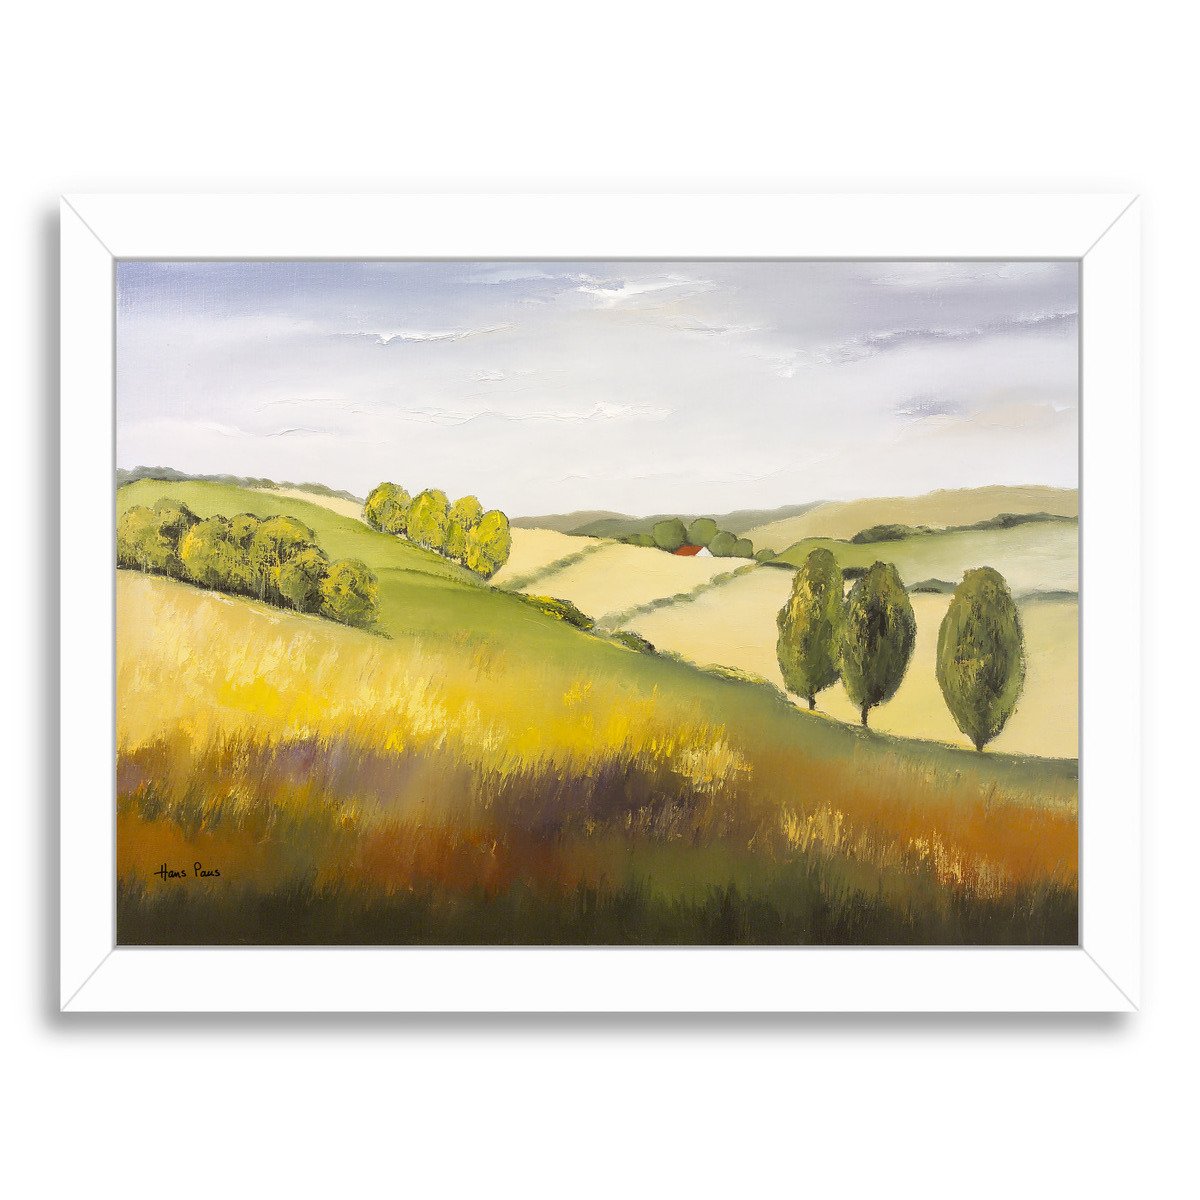 Cotswolds 1 By Hans Paus - Framed Print - Americanflat